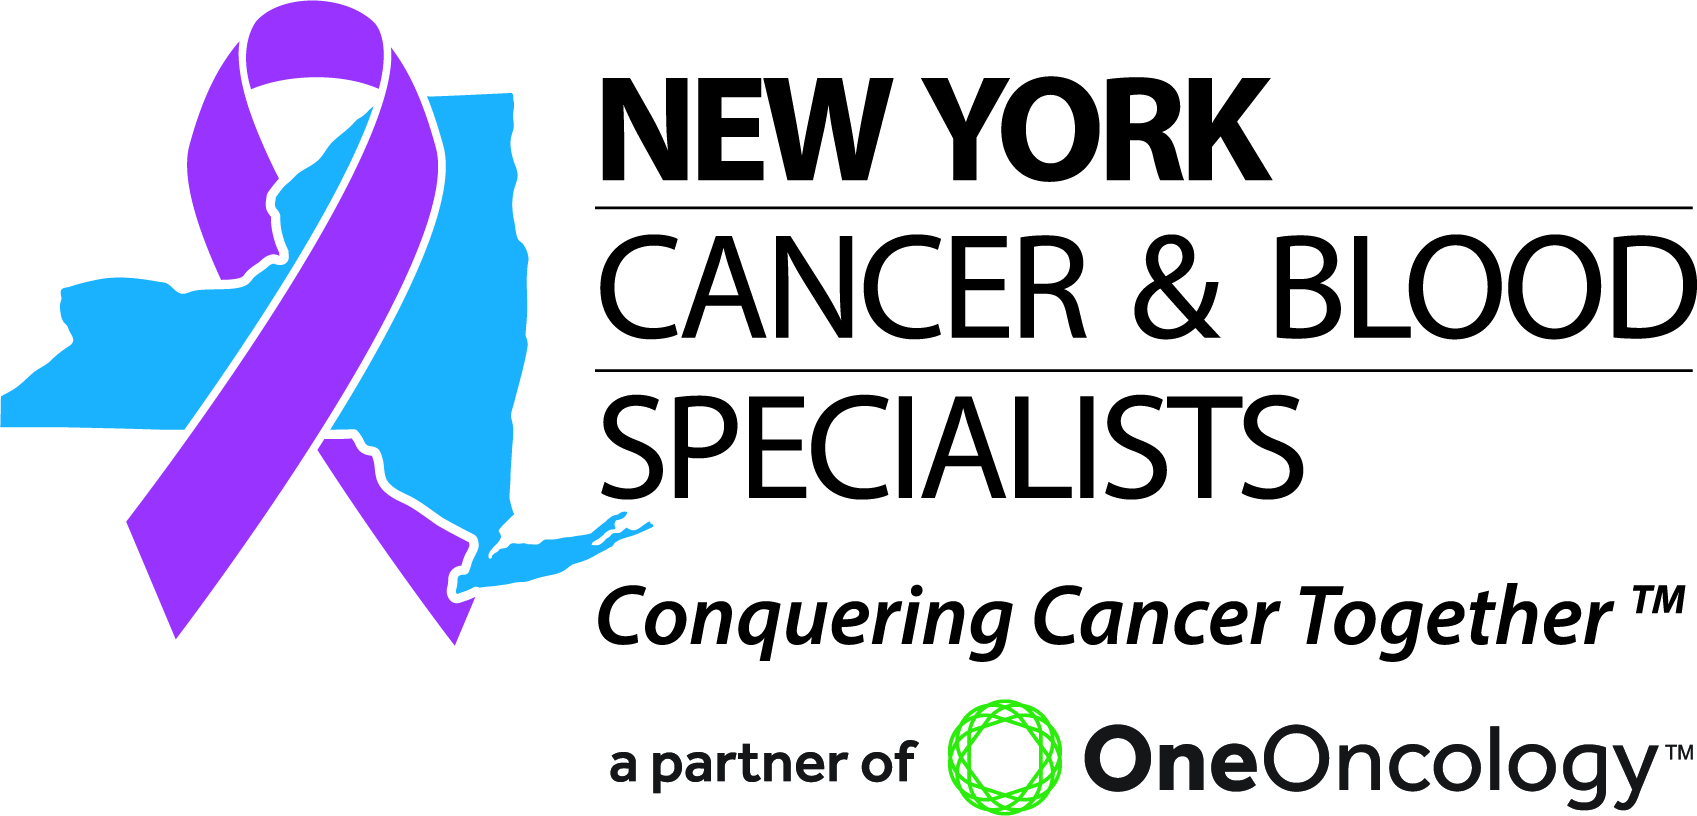 New York Cancer & Blood Specialists Opens in Upper East Side